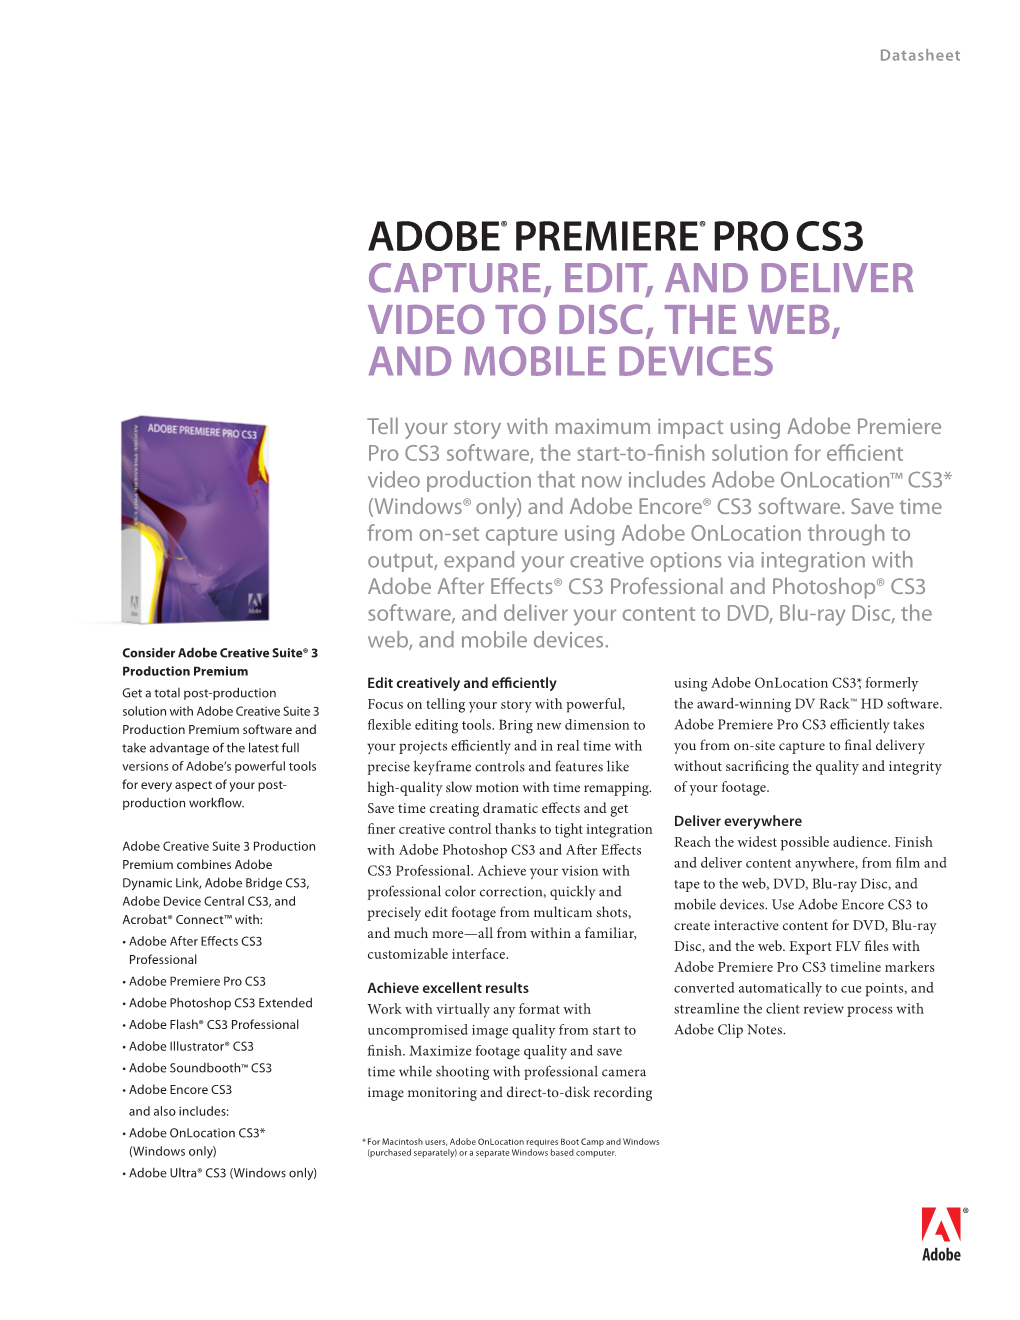 ADOBE® PREMIERE® PRO CS3 Capture, Edit, and Deliver Video to Disc, the Web, and Mobile Devices